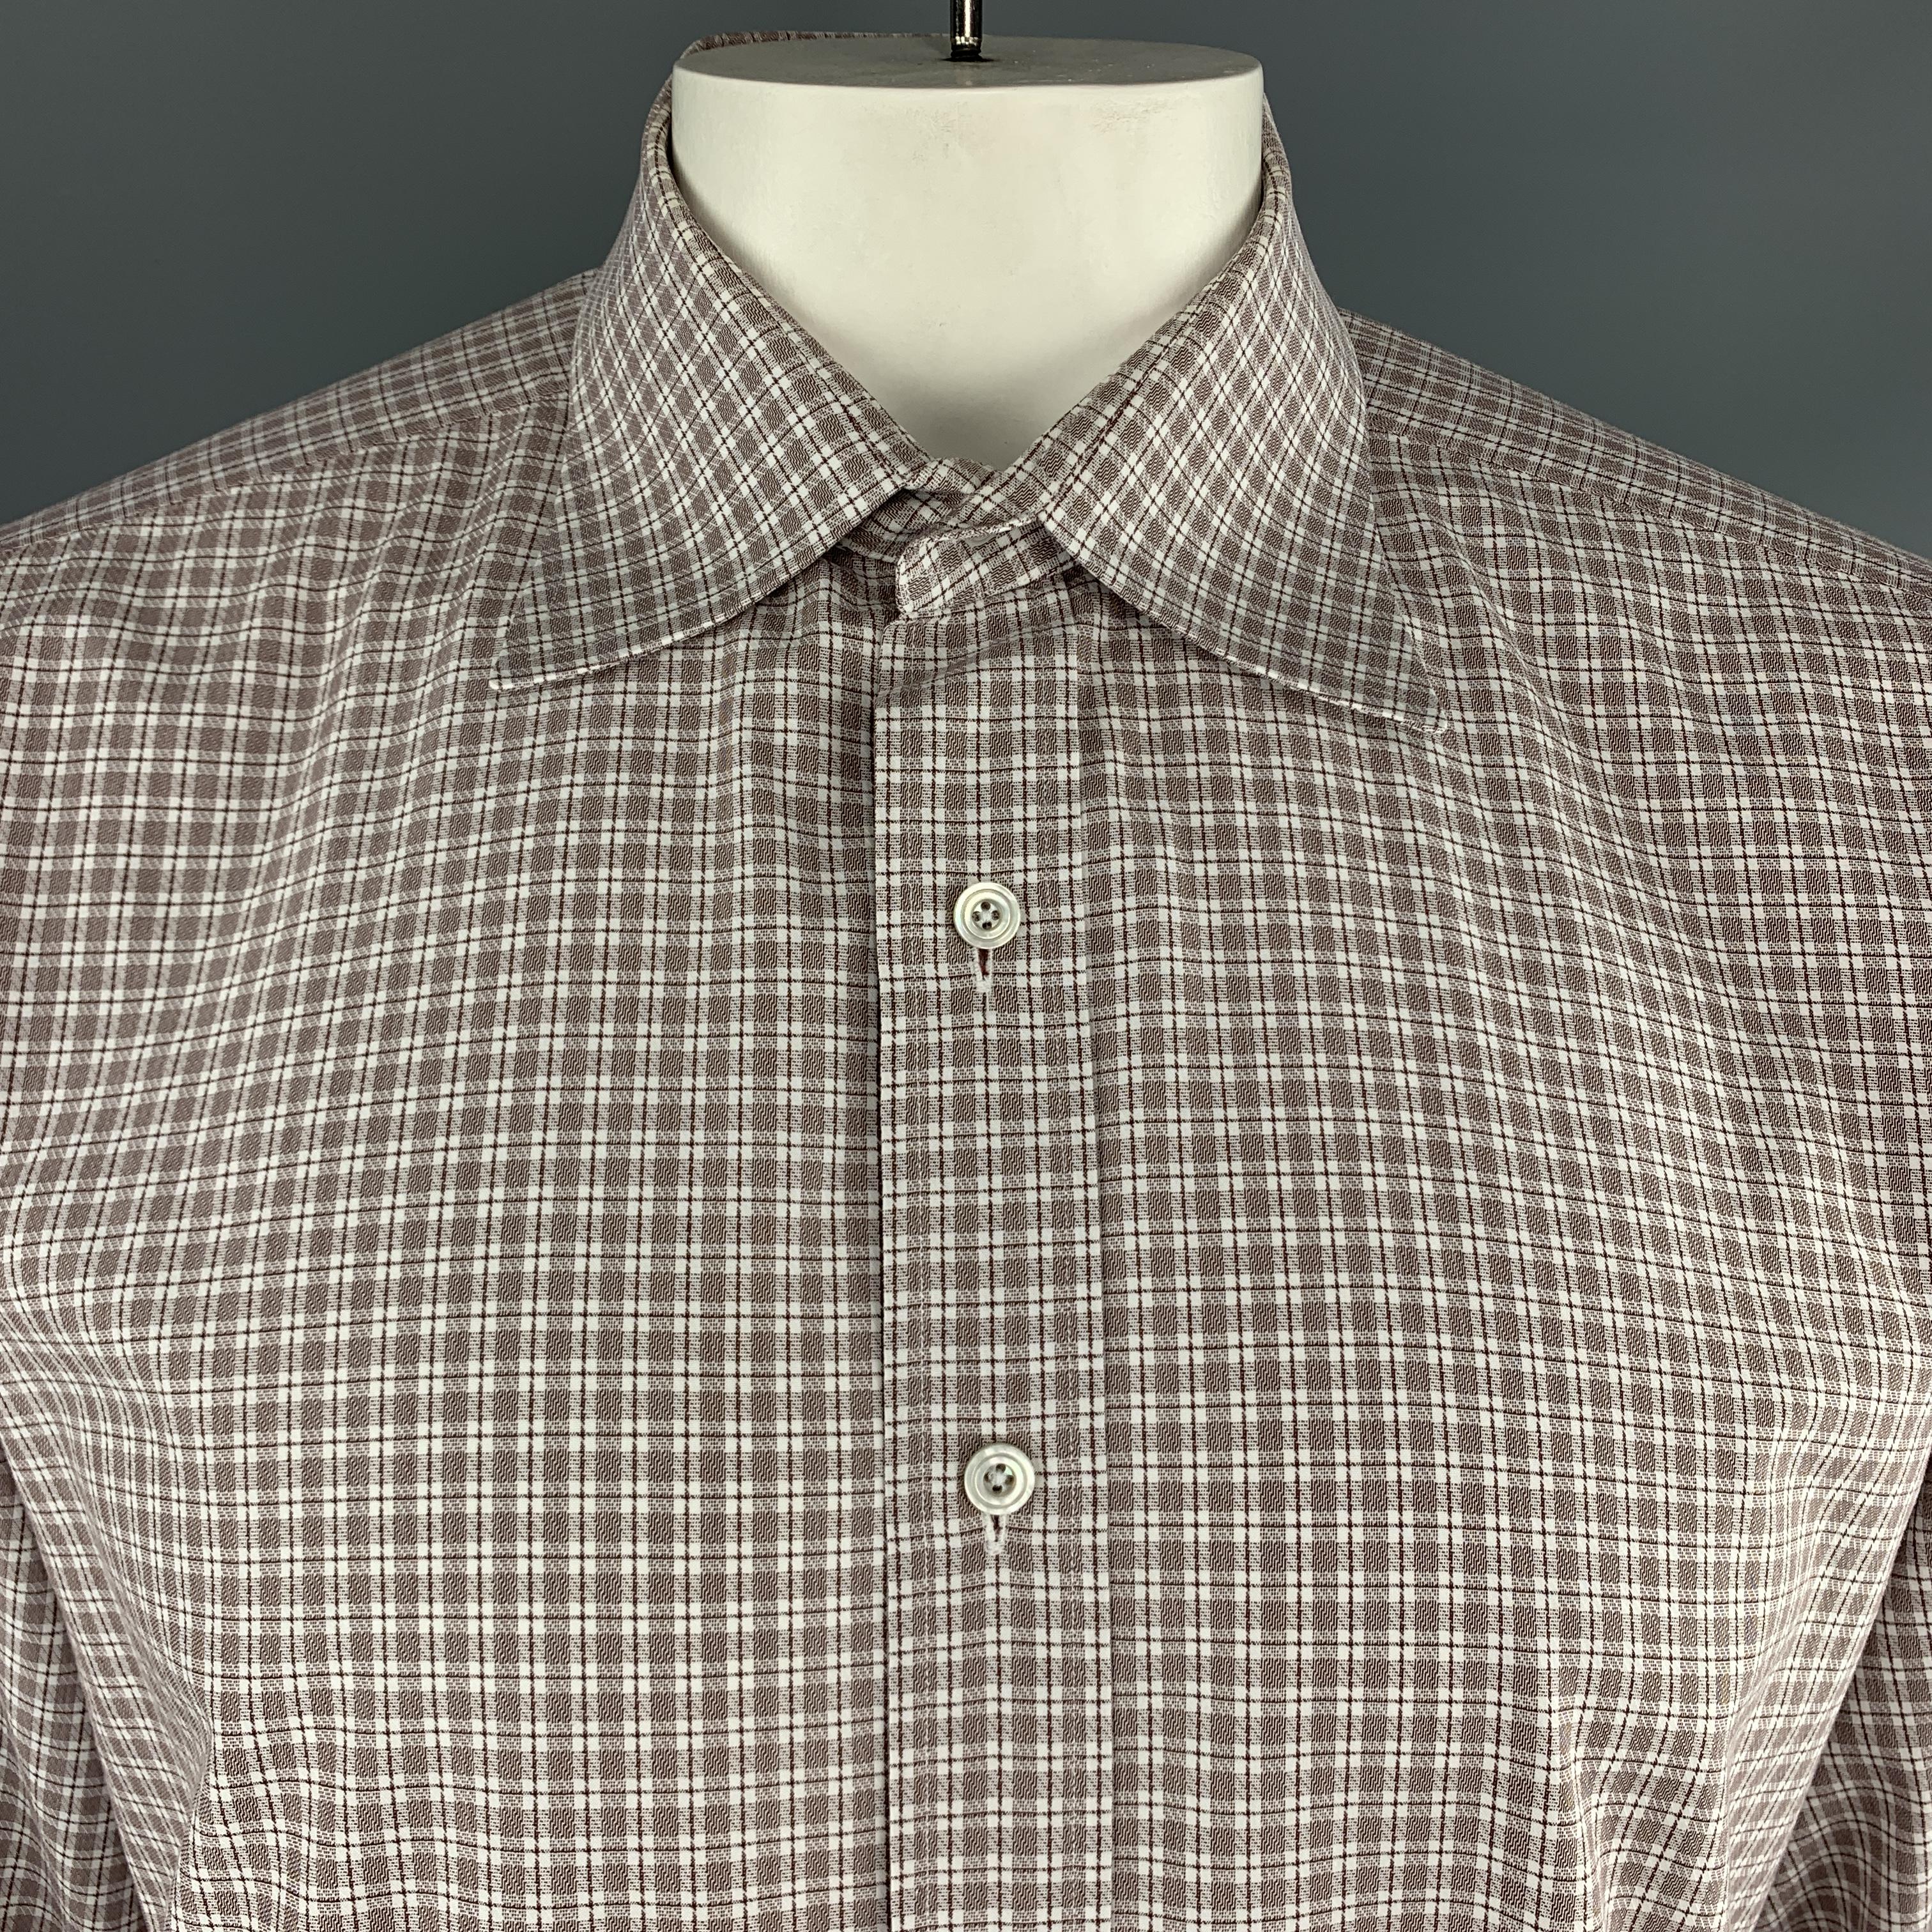 TOM FORD dress shirt comes in white and brown micro plaid cotton with a pointed spread collar and button up front. Made in Italy.

Excellent Pre-Owned Condition.
Marked: 44/17.5

Measurements:

Shoulder: 18.5 in.
Chest: 50 in.
Sleeve: 27 in.
Length: